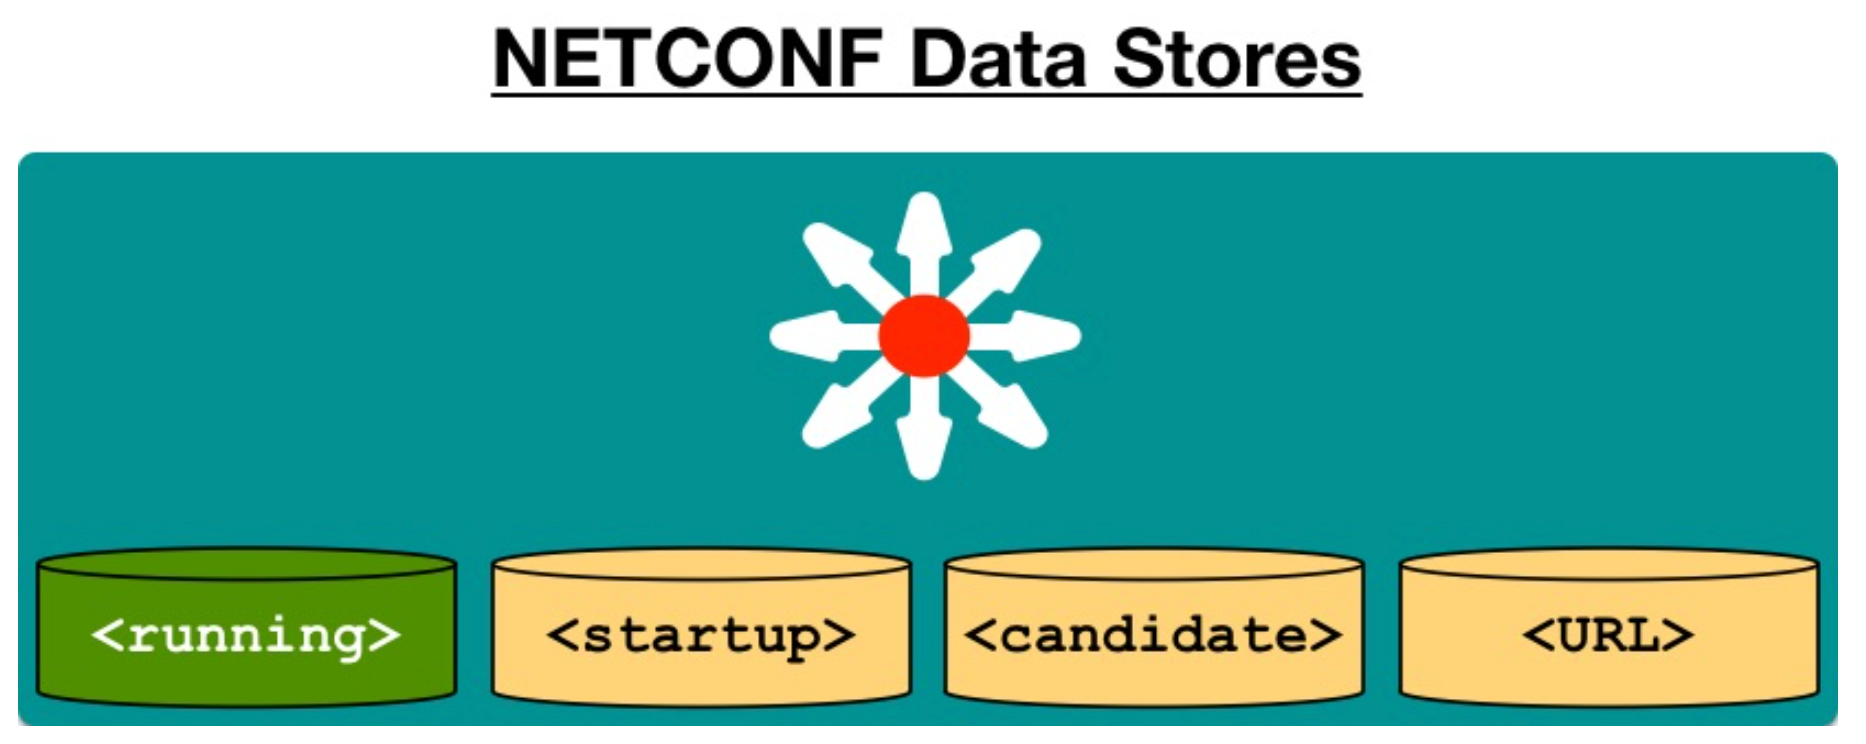 NETCONF-data-stores.png